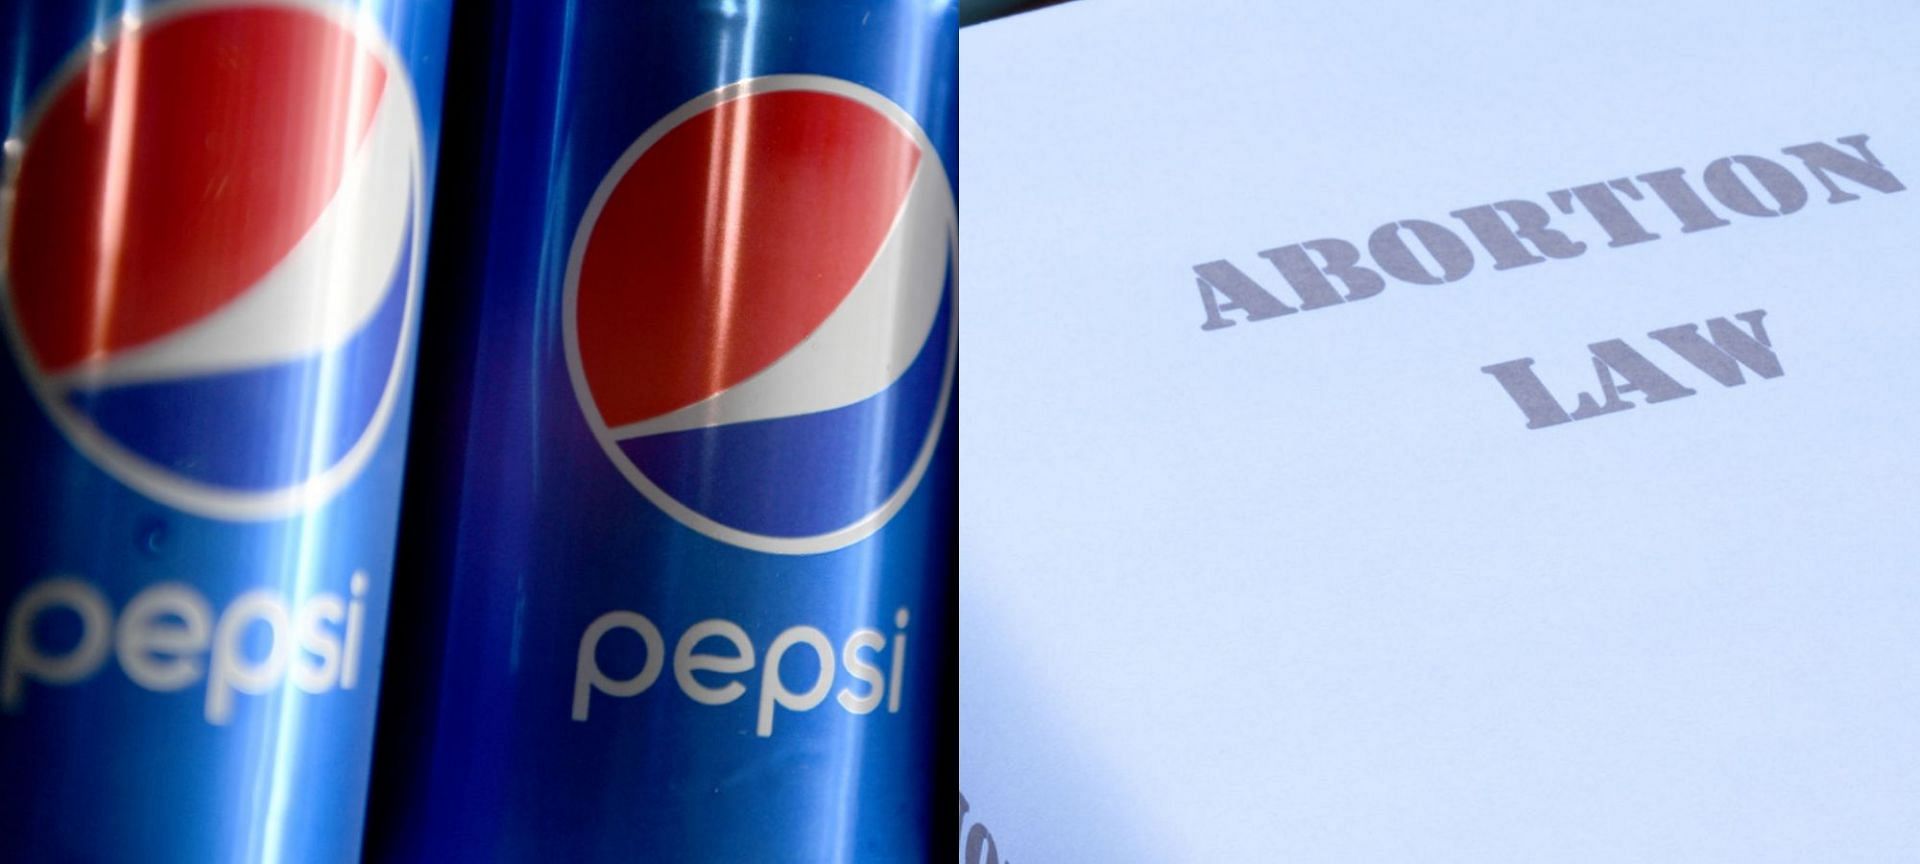 PepsiCo came under fire after claims about the company allegedly donating to aid Texas Abortion Bill lawmakers surfaced online (Image via Denise Truscello/Getty Images and ericsphotography/GettyImages)